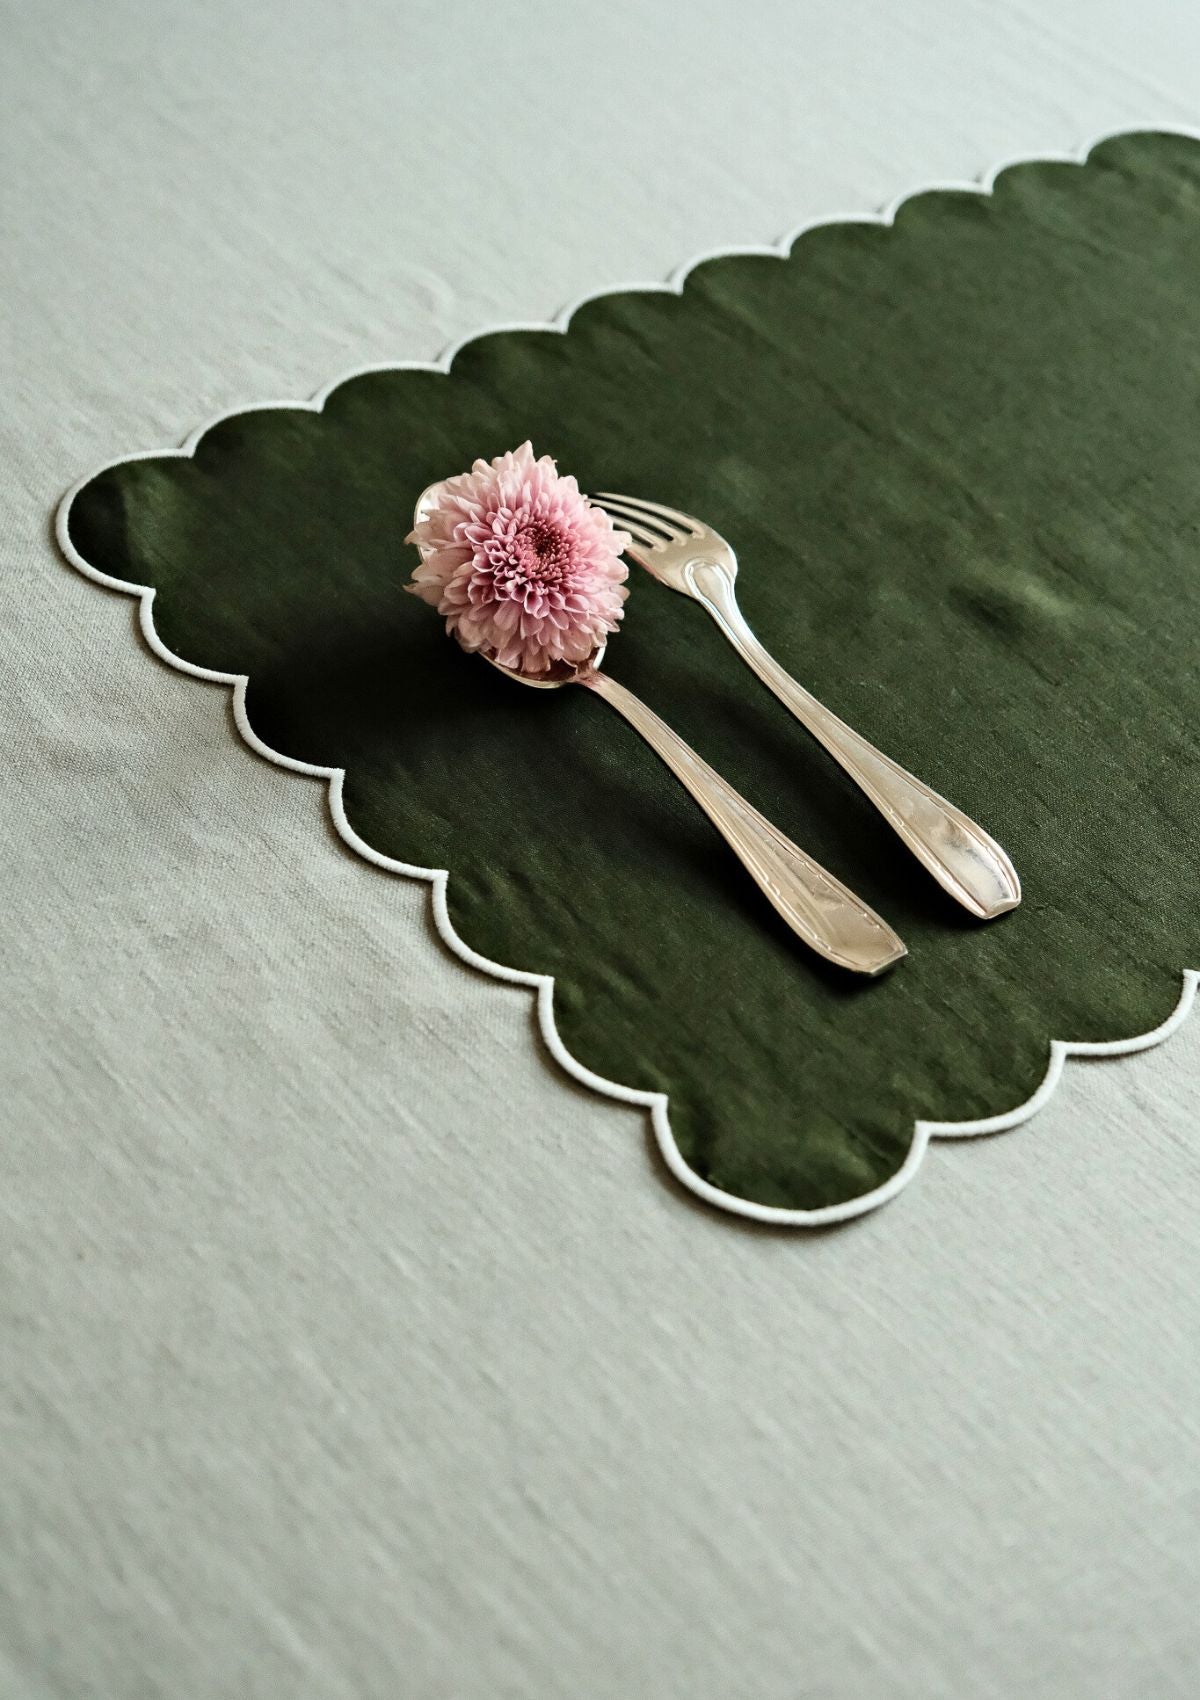 Scalloped rectangular placemats in Forest green & White linen